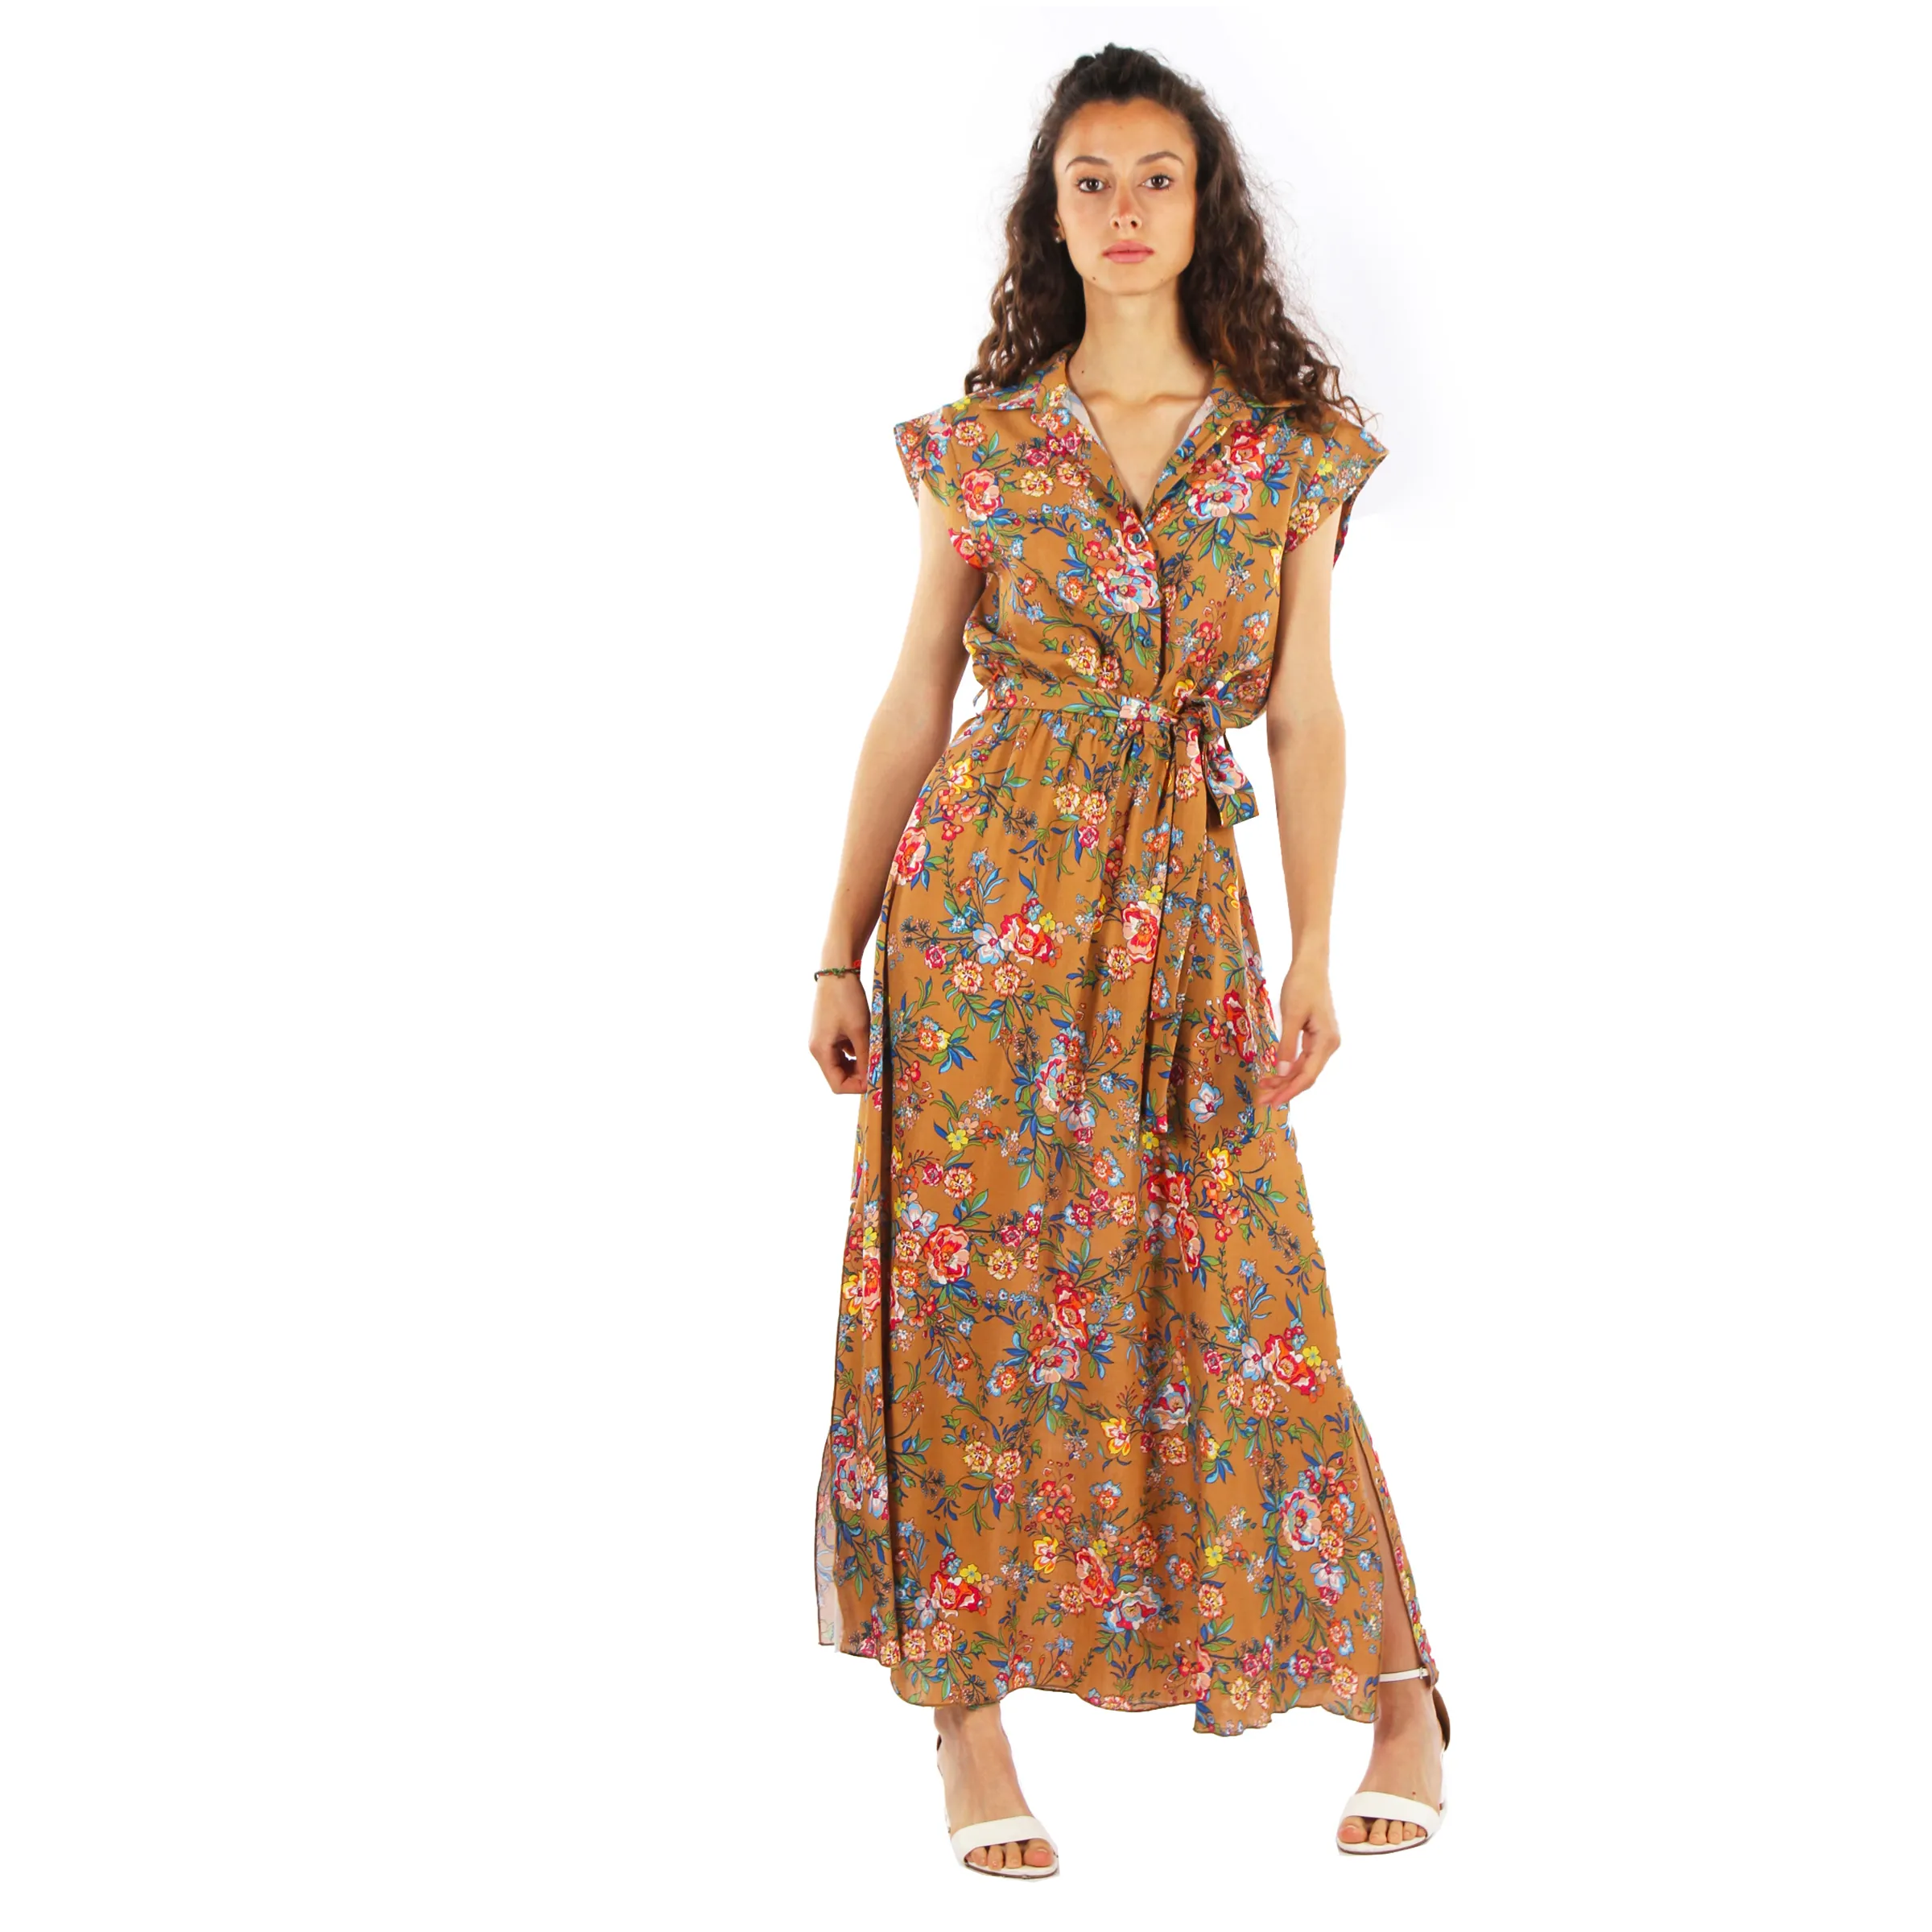 Chic Versatility  Viscose-Polyester Floral Dress in Brown with Flower Print  Ideal for Any Occasion size medium